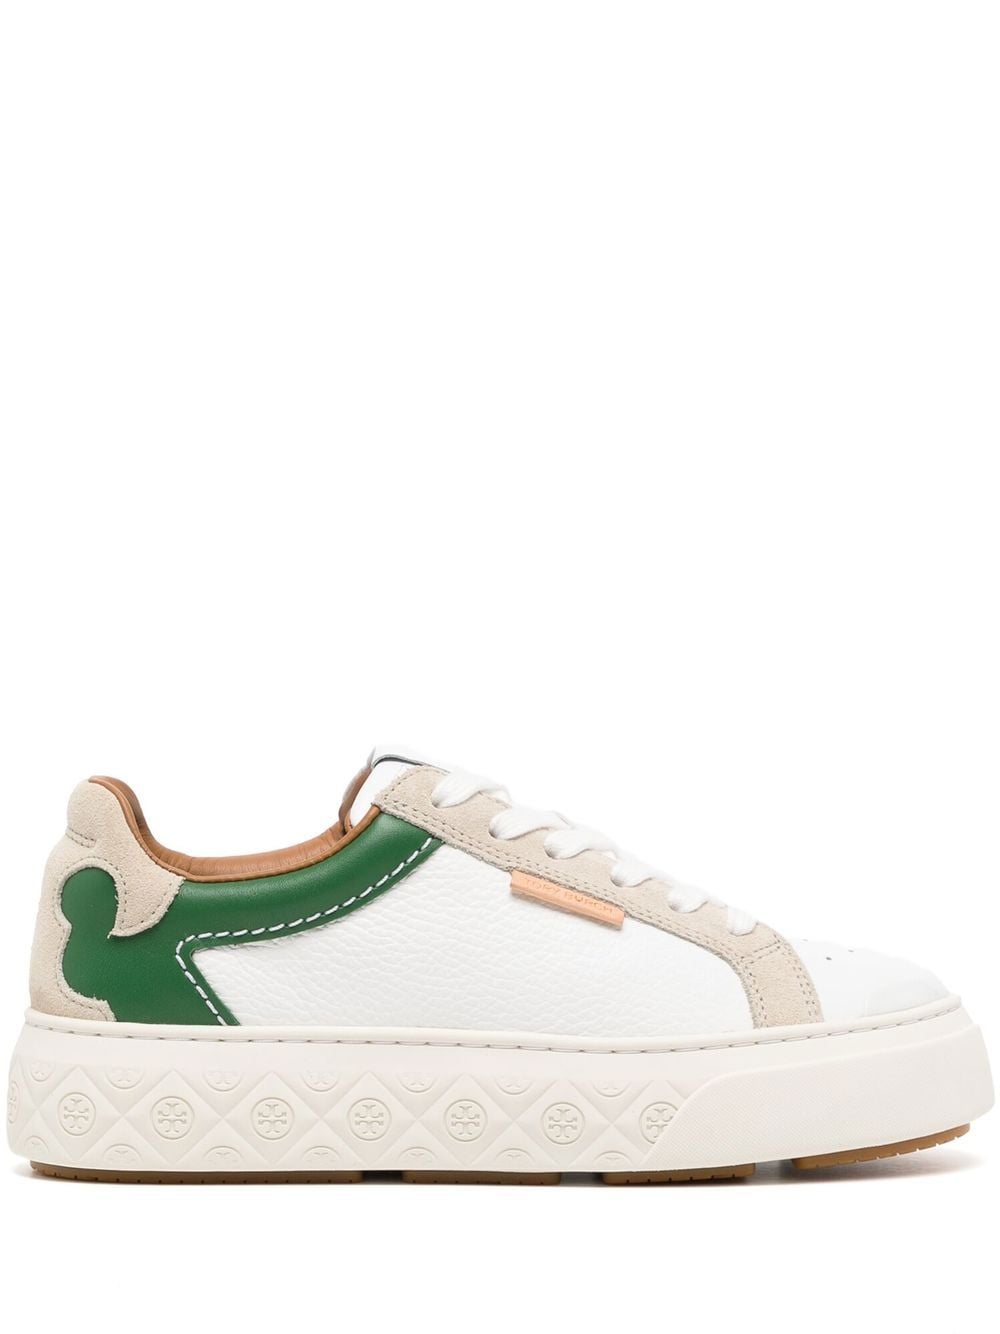 TORY BURCH LOW-TOP LEATHER SNEAKERS